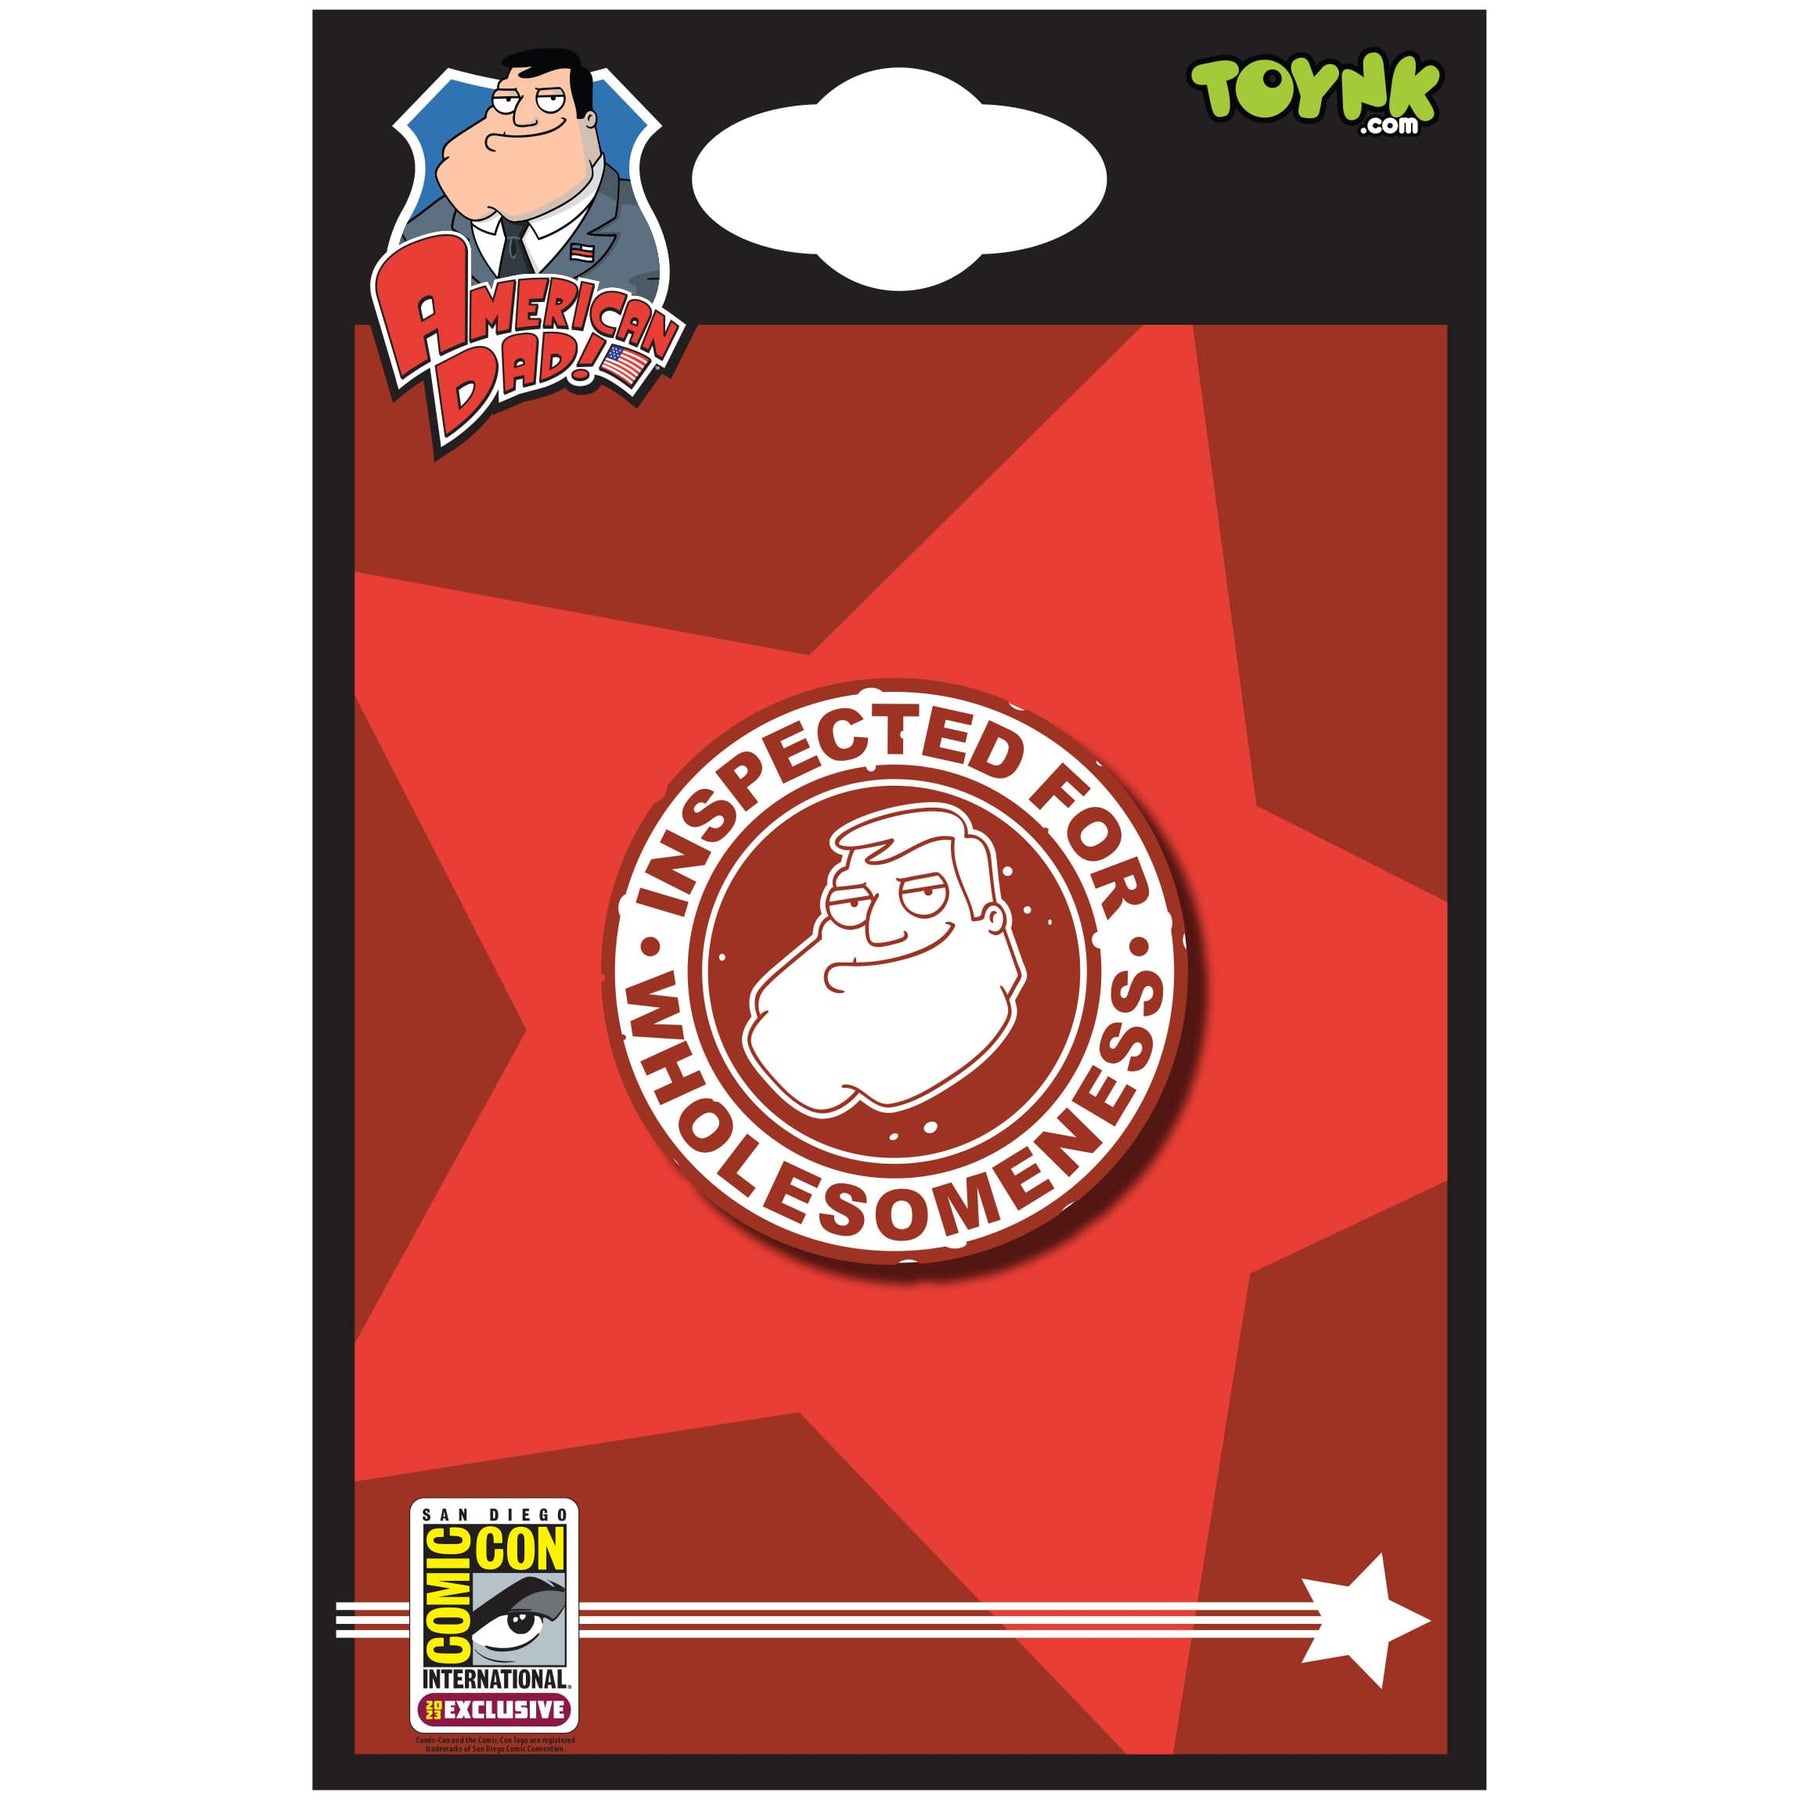 American Dad! "Inspected For Wholesomeness" Enamel Pin | SDCC 2023 Exclusive